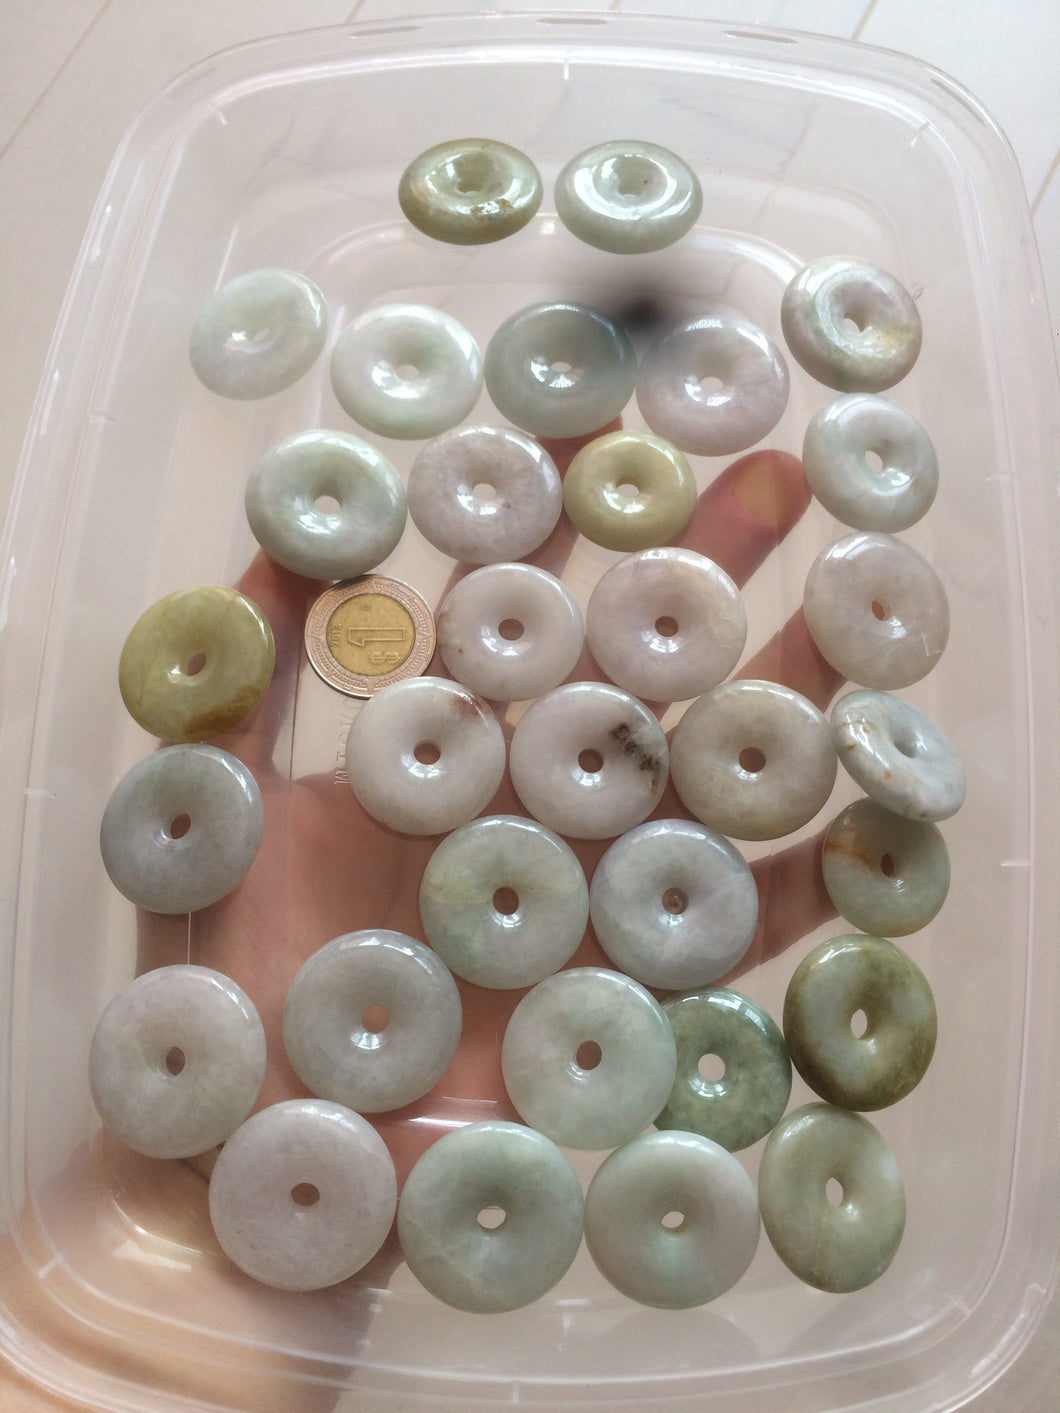 24-25mm Type A 100% Natural light green/white/purple/red Jadeite Jade Safety Guardian Button donut Pendant group AK39 (Add-on items)